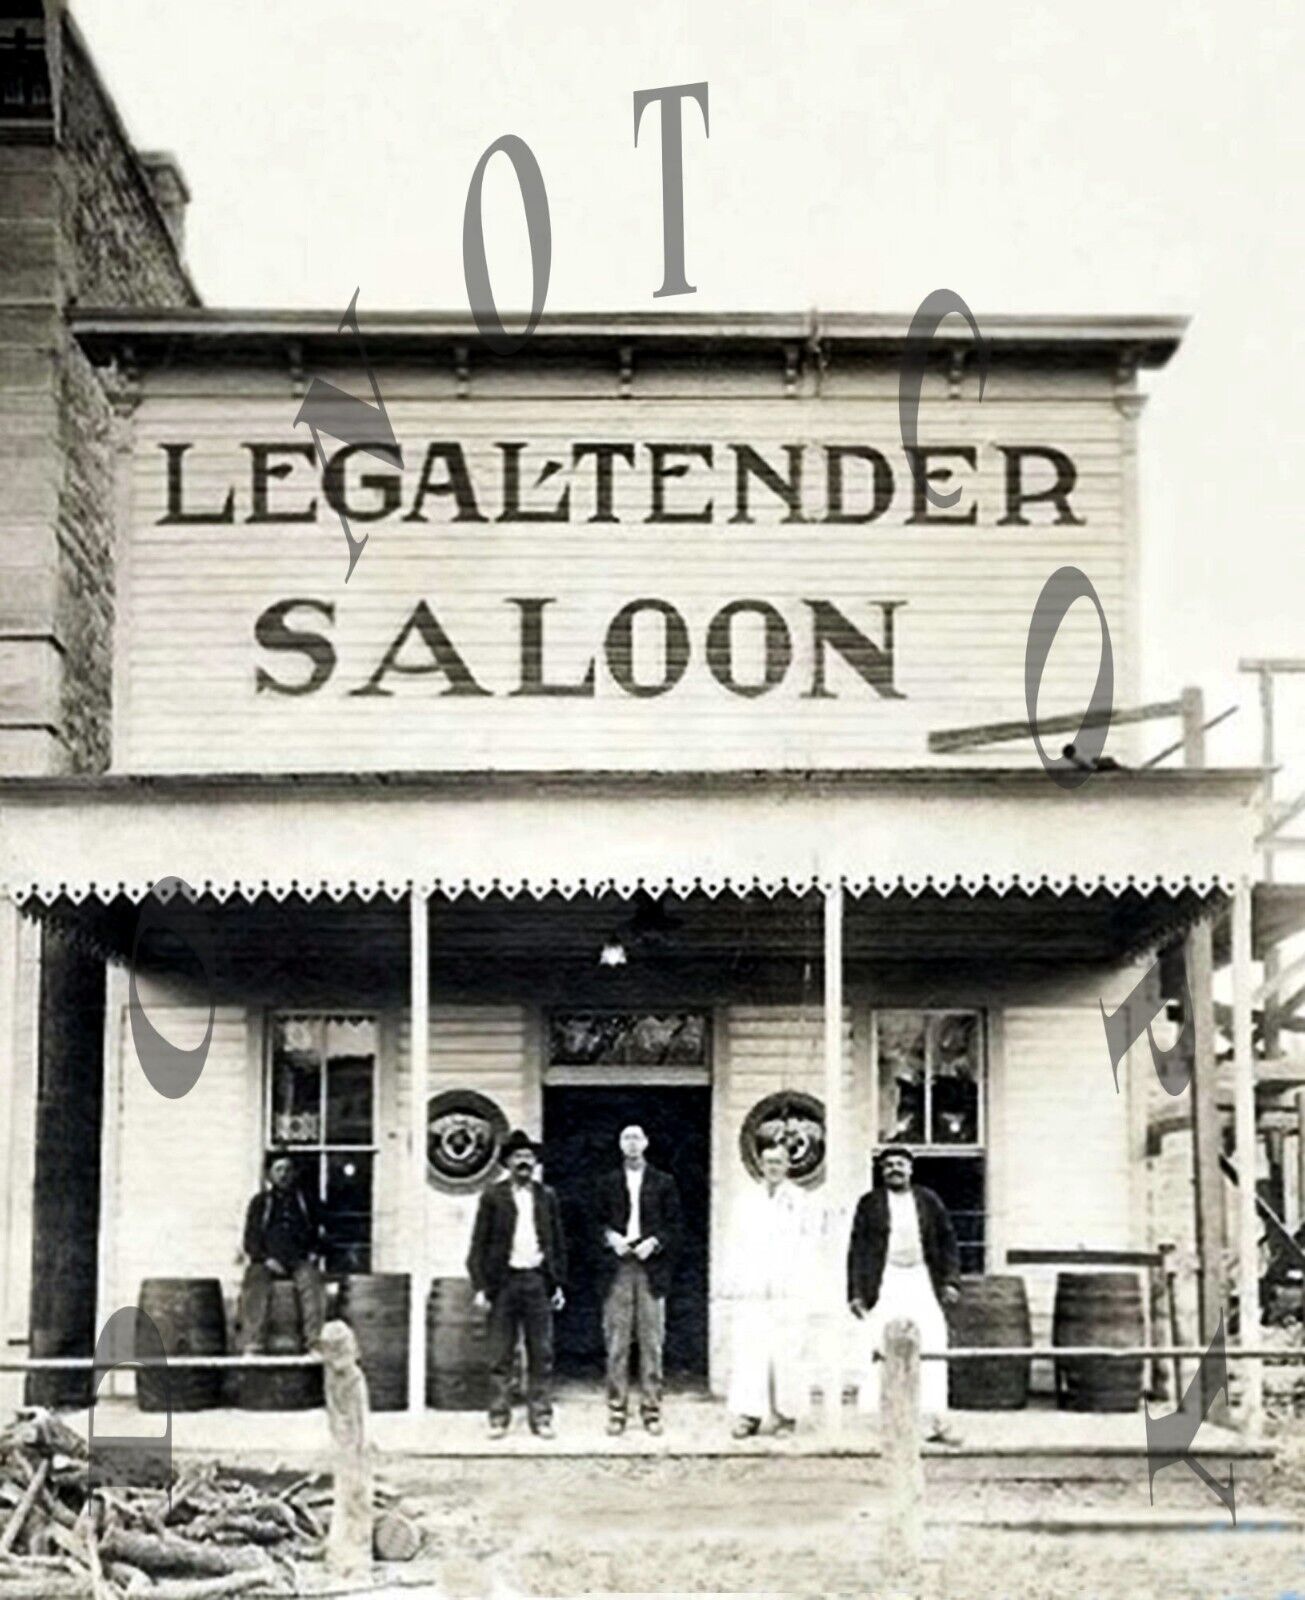 ANTIQUE OLD WEST REPRO EXTERIOR 8X10 PHOTO PRINT OF WESTERN LEGAL TENDER SALOON